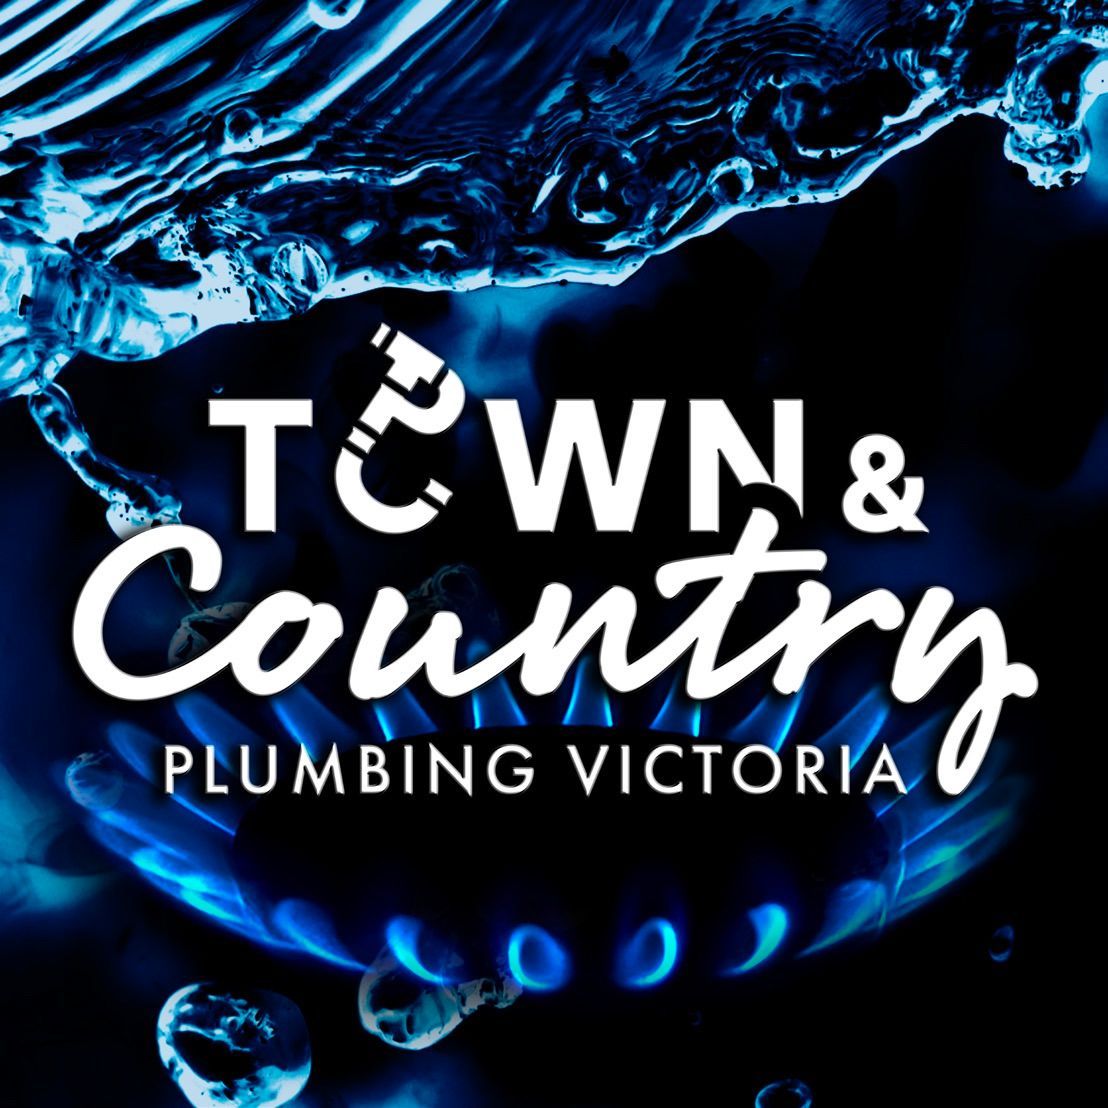 Town & Country Plumbing: Comprehensive Plumbing Services in Greendale